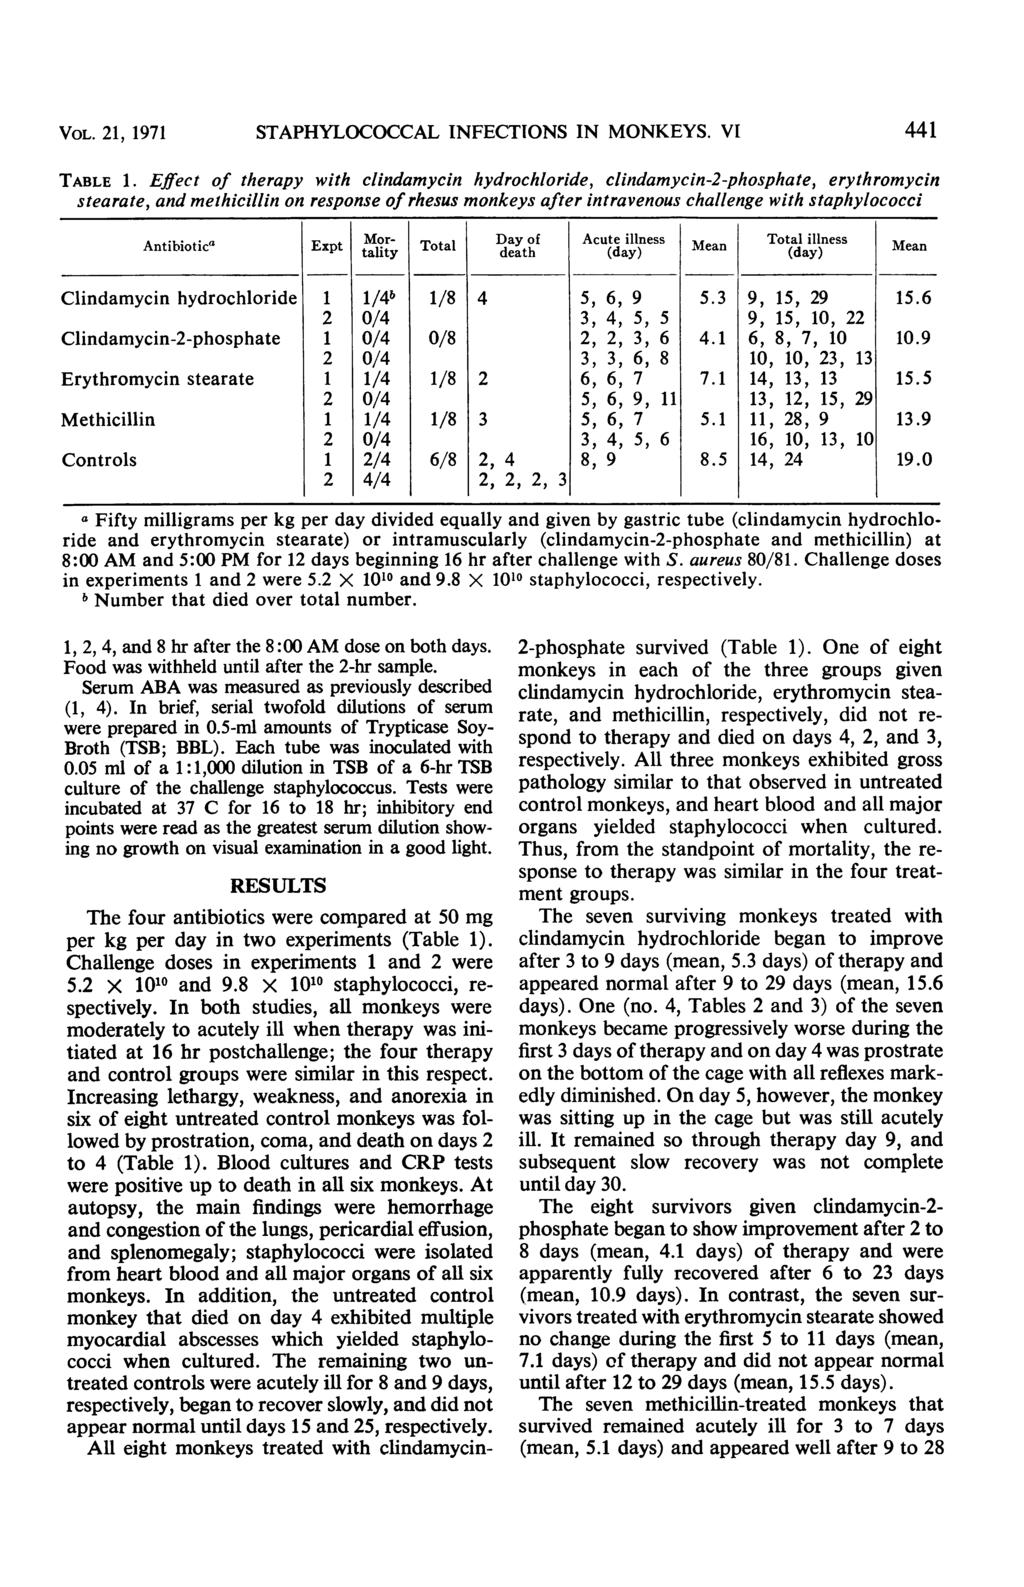 VOL. 21, 1971 STAPHYLOCOCCAL INFECTIONS IN MONKEYS. VI 441 TABLE 1.